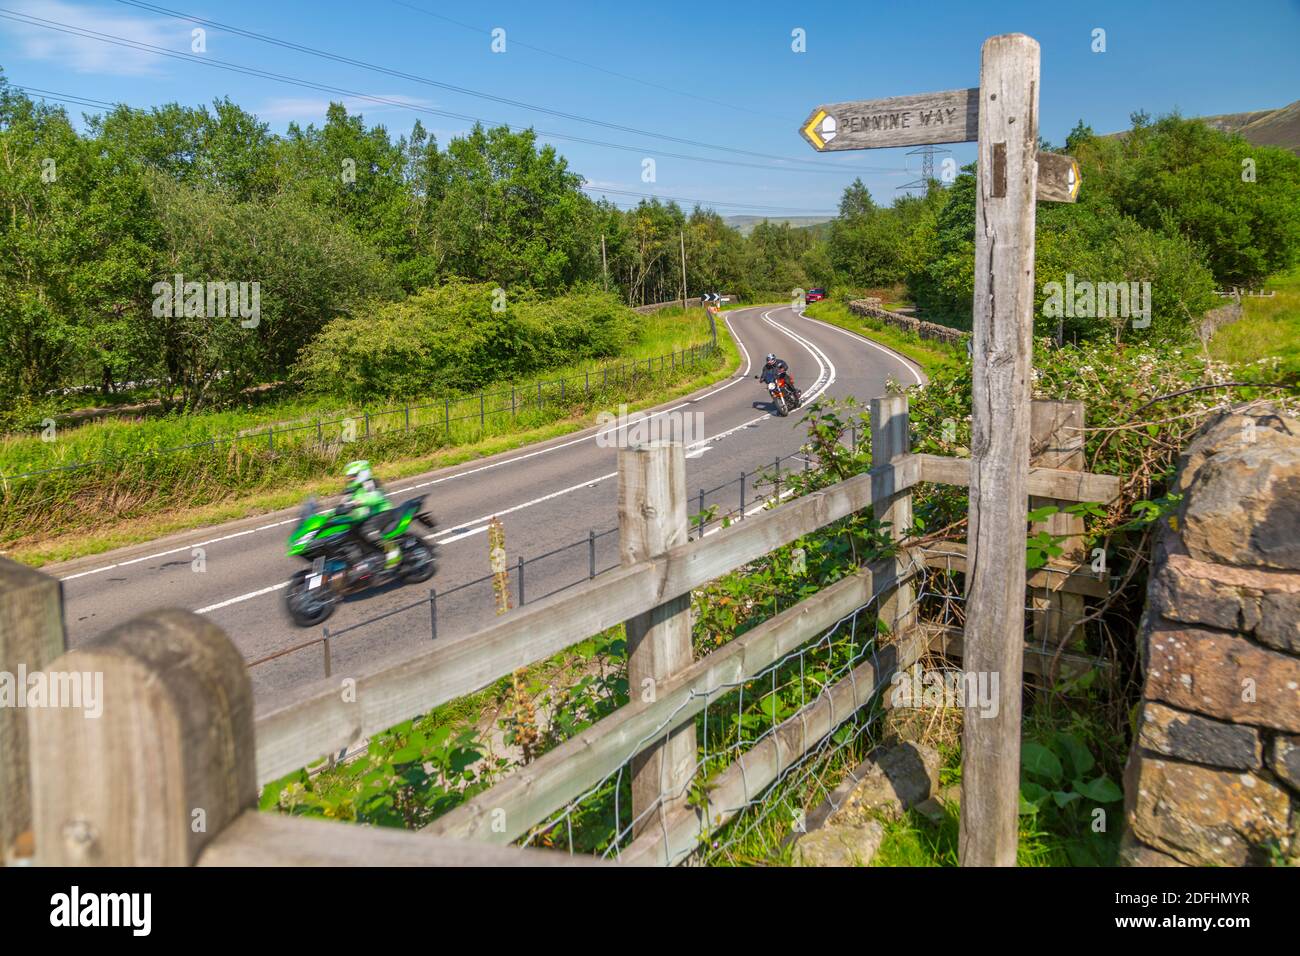 View of motorcyclists on the road and Penine Way sign near Hayfield, High Peak, Derbyshire, England, United Kingdom, Europe Stock Photo